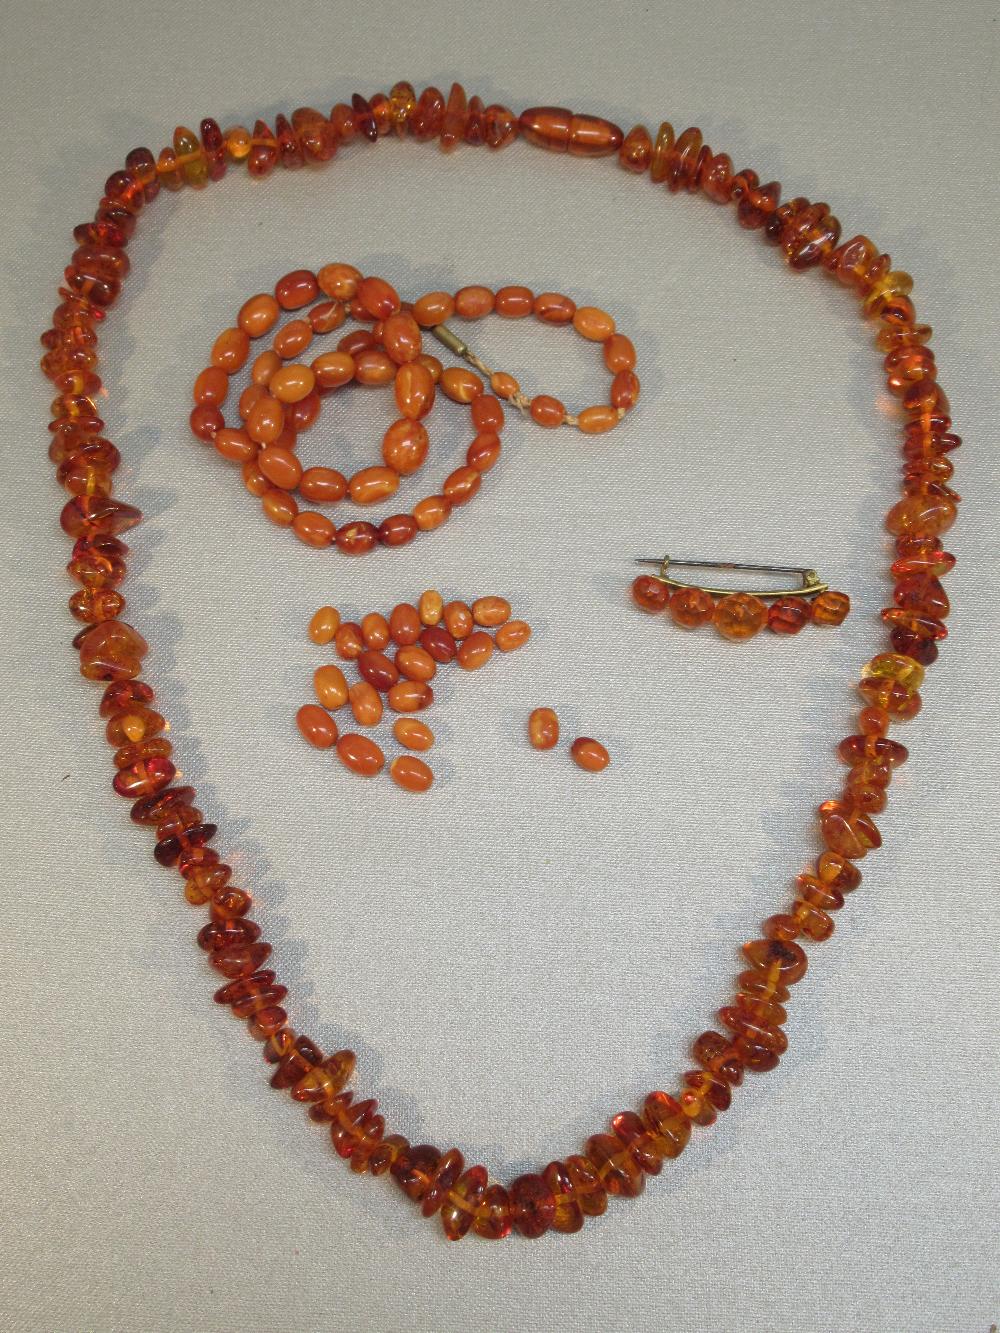 BAROQUE AMBER BEAD NECKLACE,LENGTH 61cm (41.8g) AMBER COLOURED BEAD NECKLACE AND A BROOCH [3]